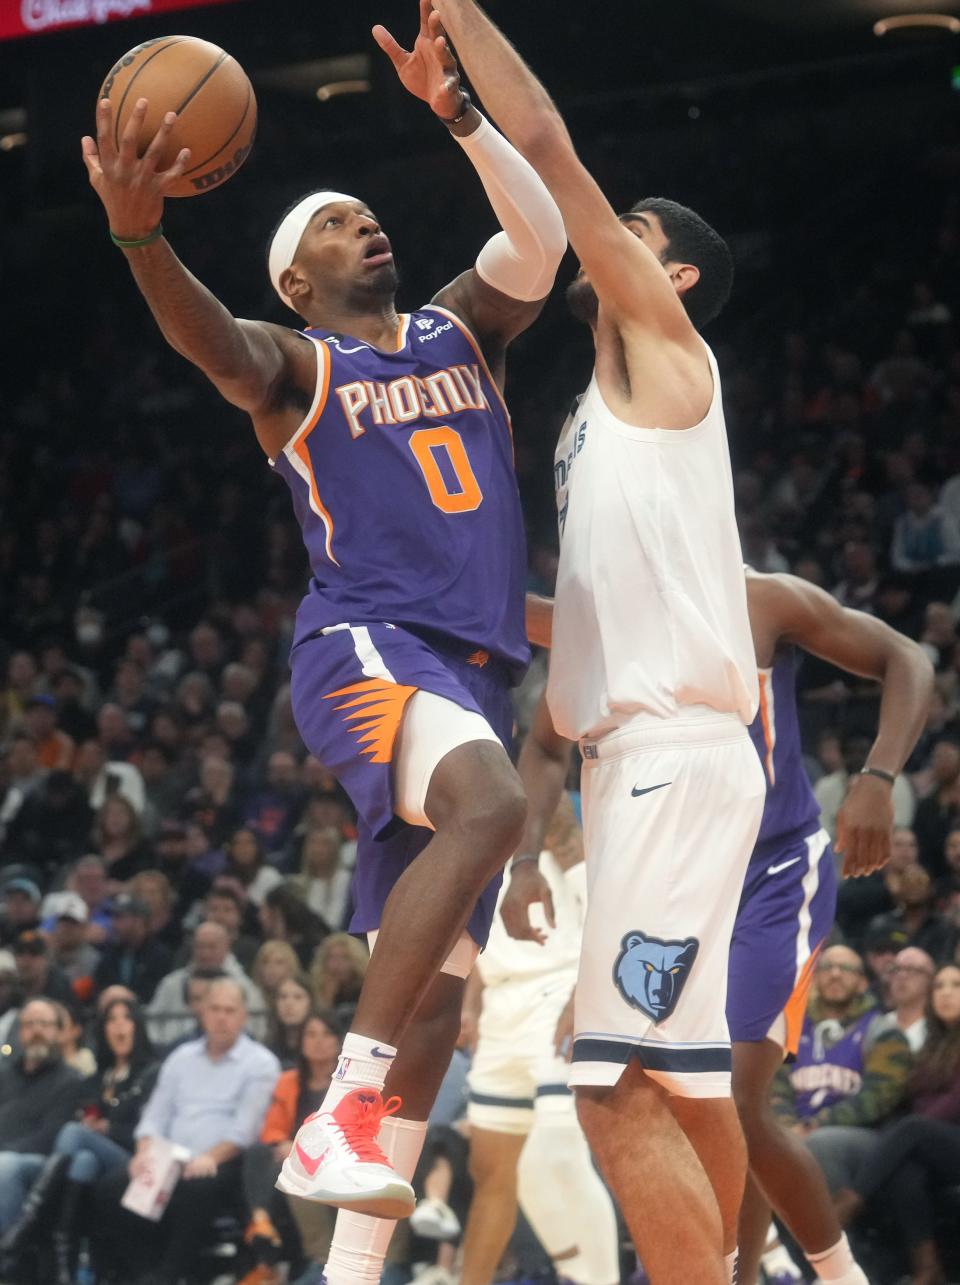 Phoenix Suns forward Torrey Craig (0) lays the ball up while being fouled by Memphis Grizzlies forward Santi Aldama (7) at Footprint Center on Jan. 22, 2023.